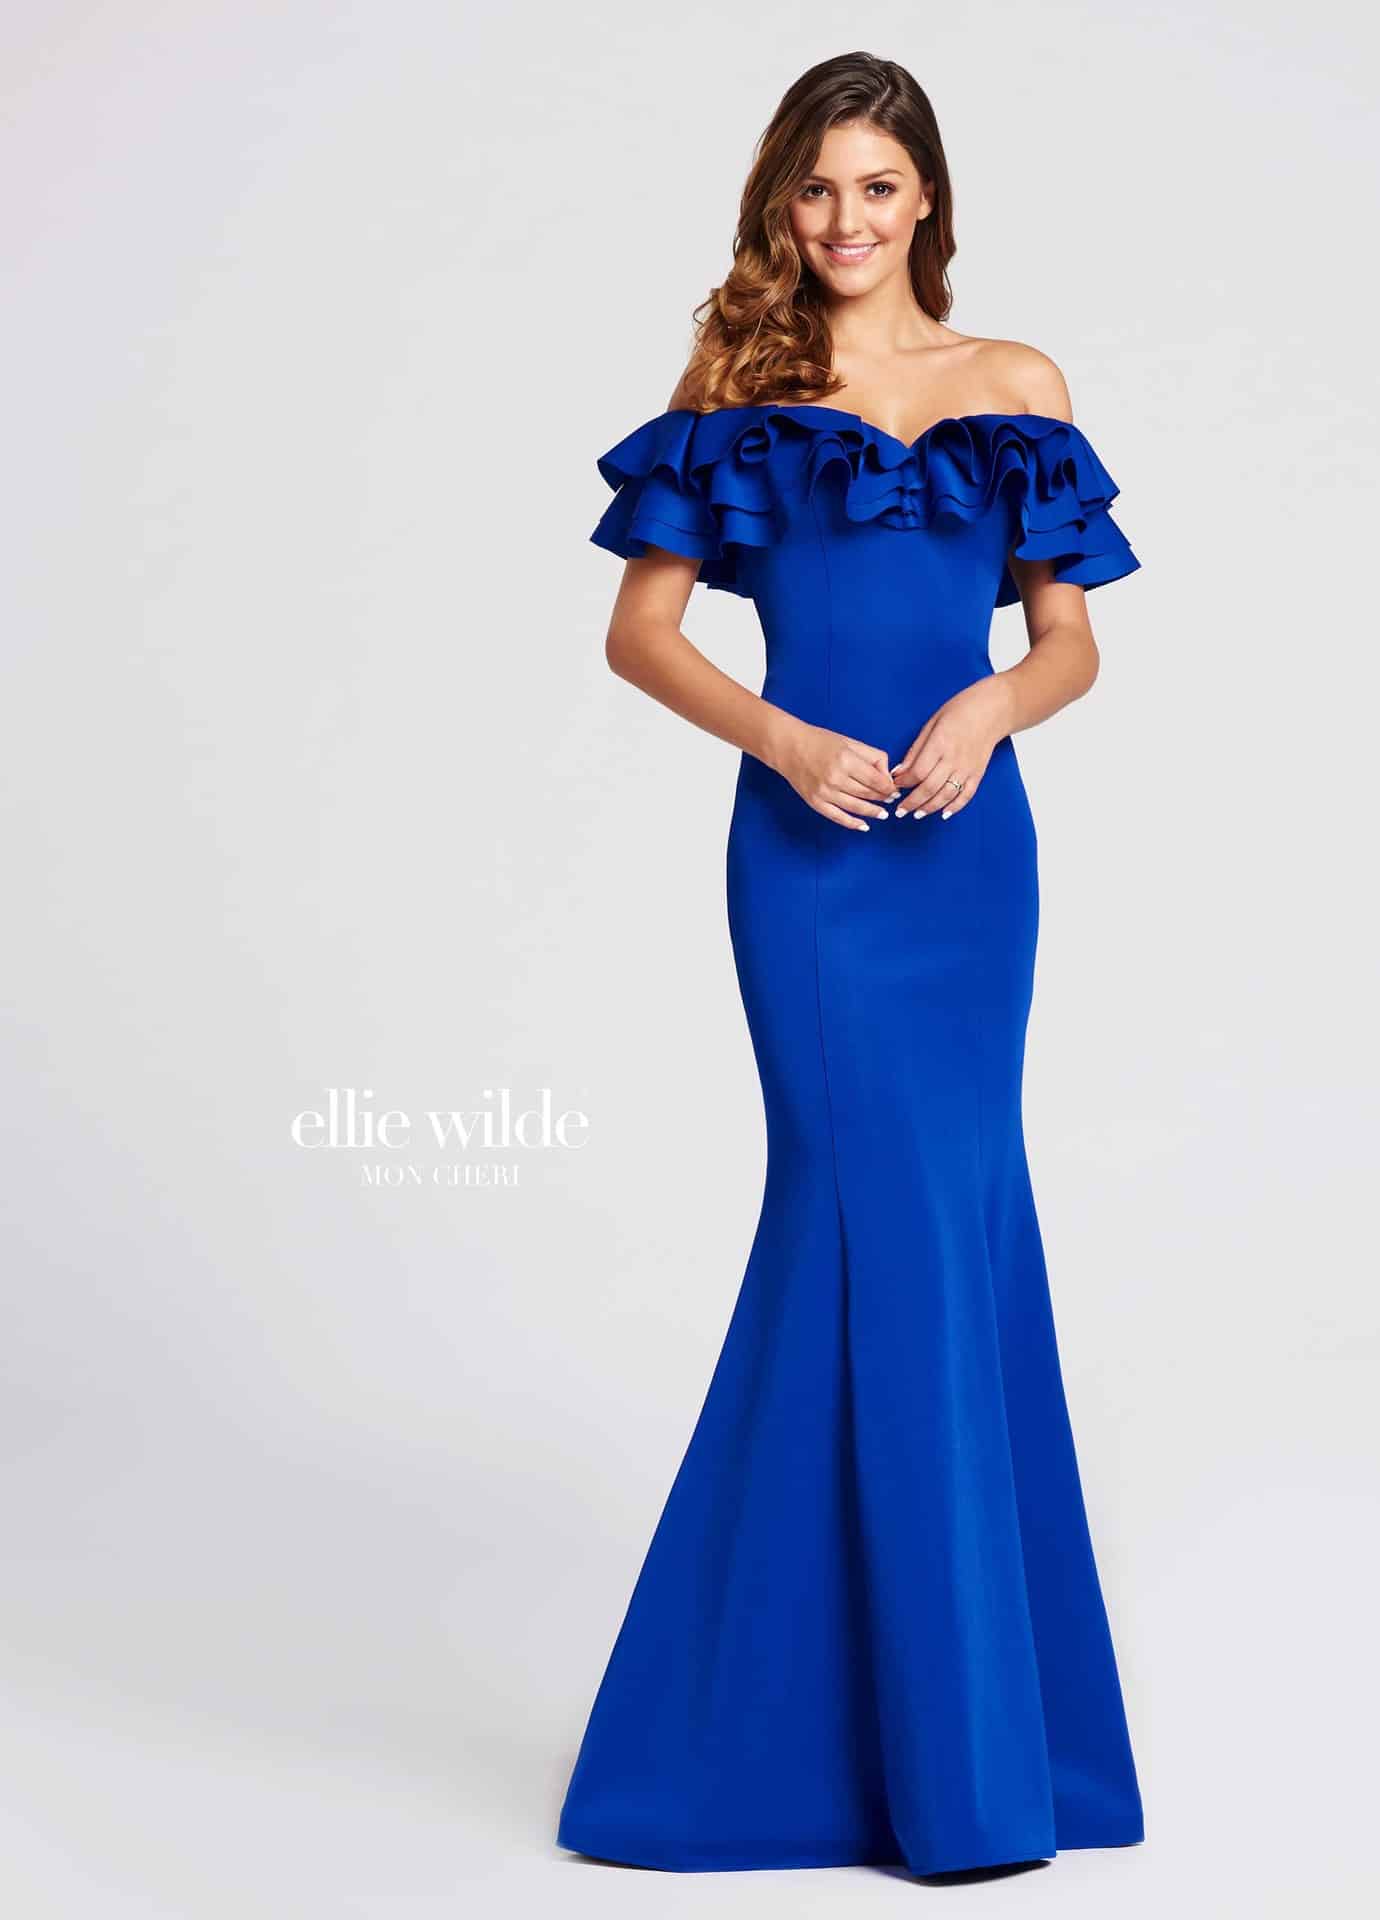 Off the shoulder full length dress with ruffle detail.